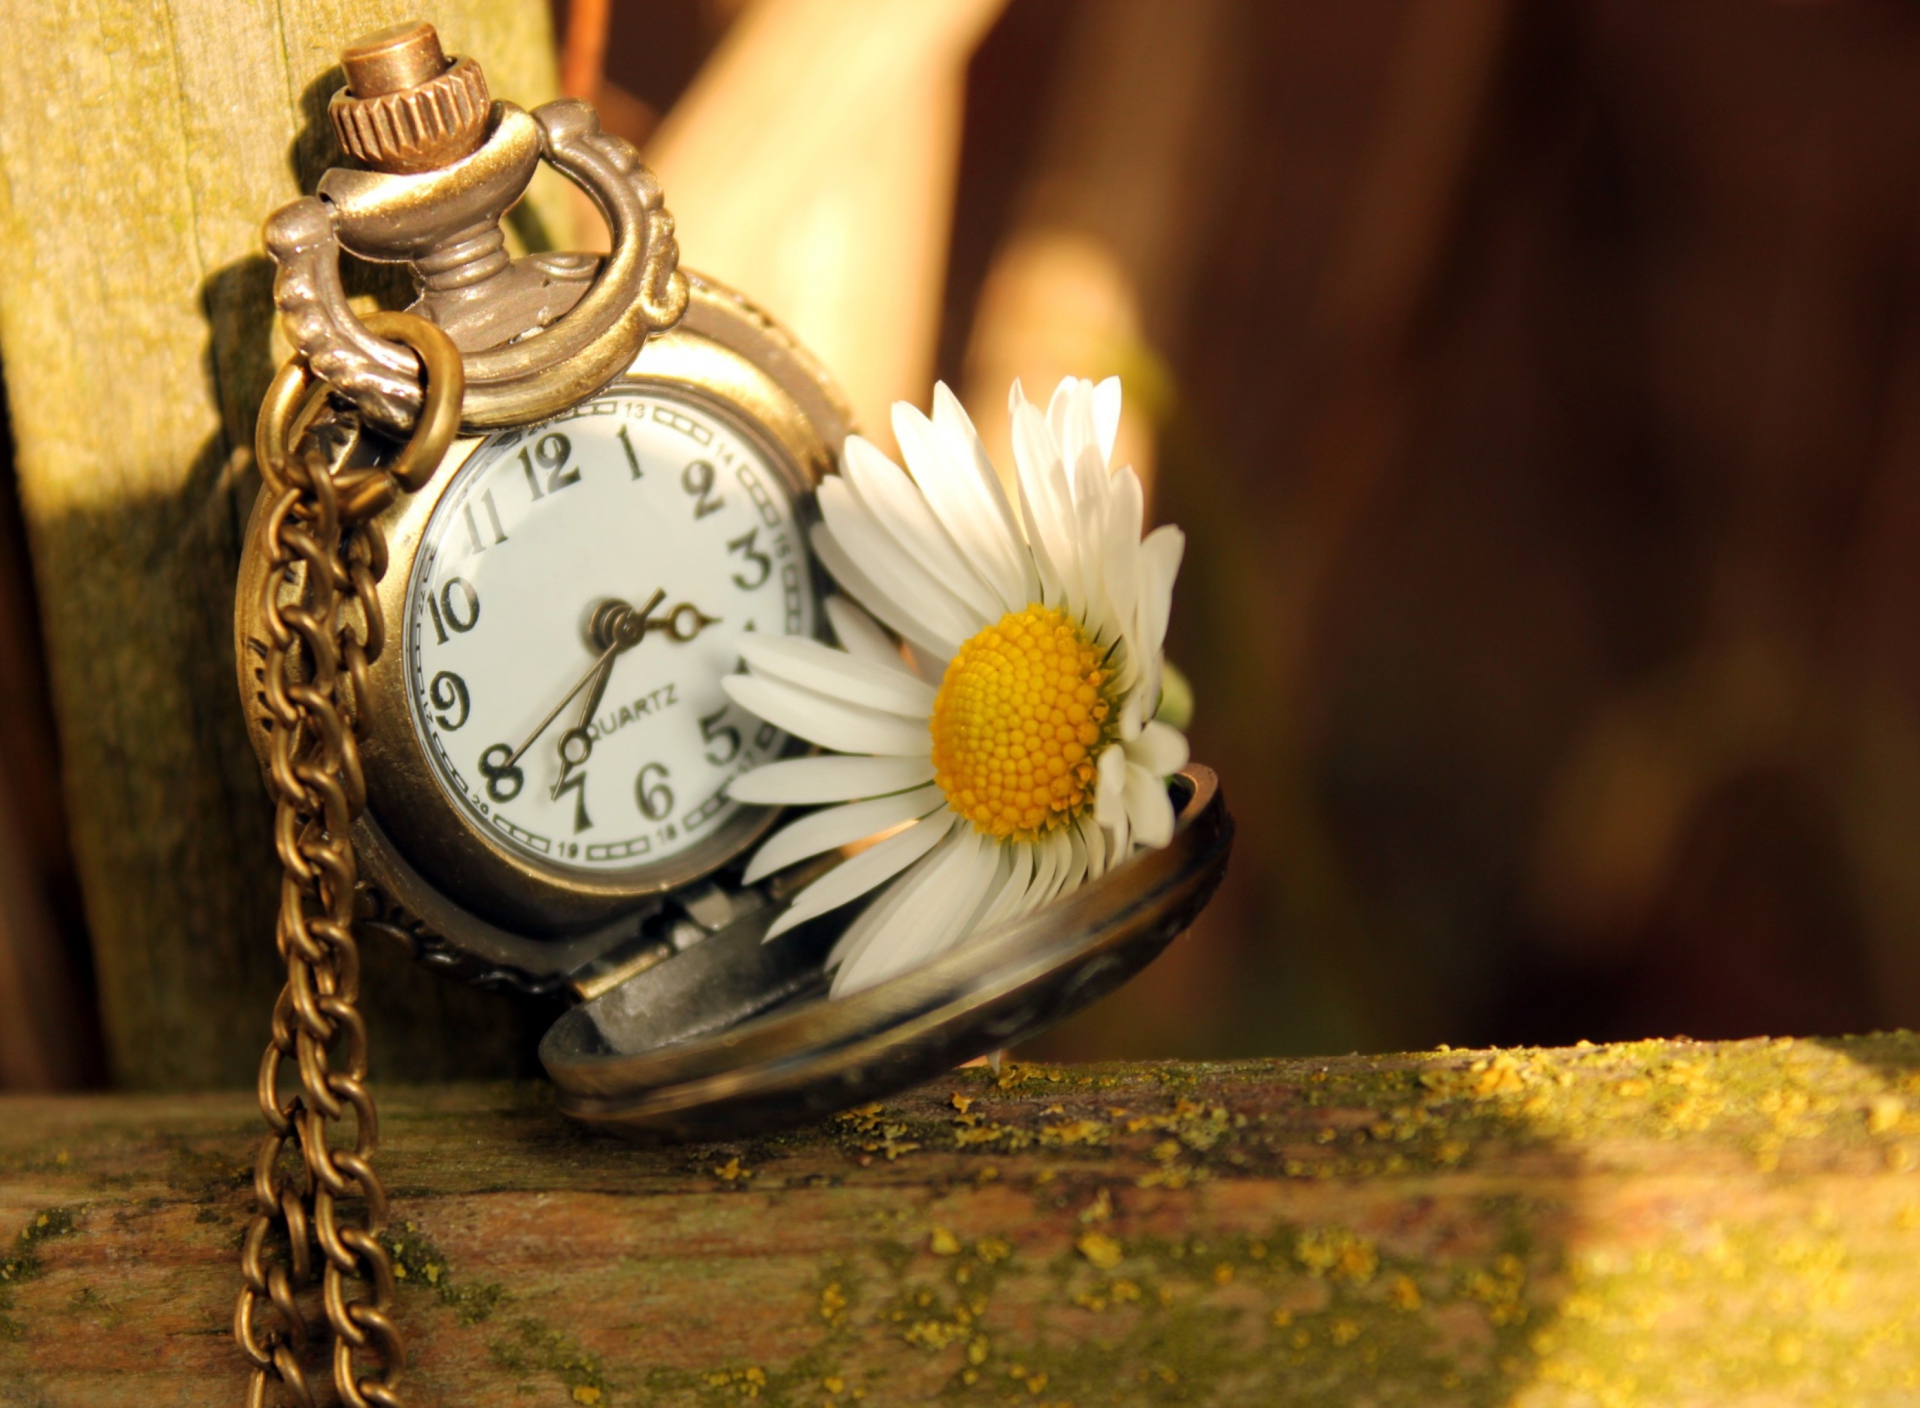 Das Vintage Watch And Daisy Wallpaper 1920x1408